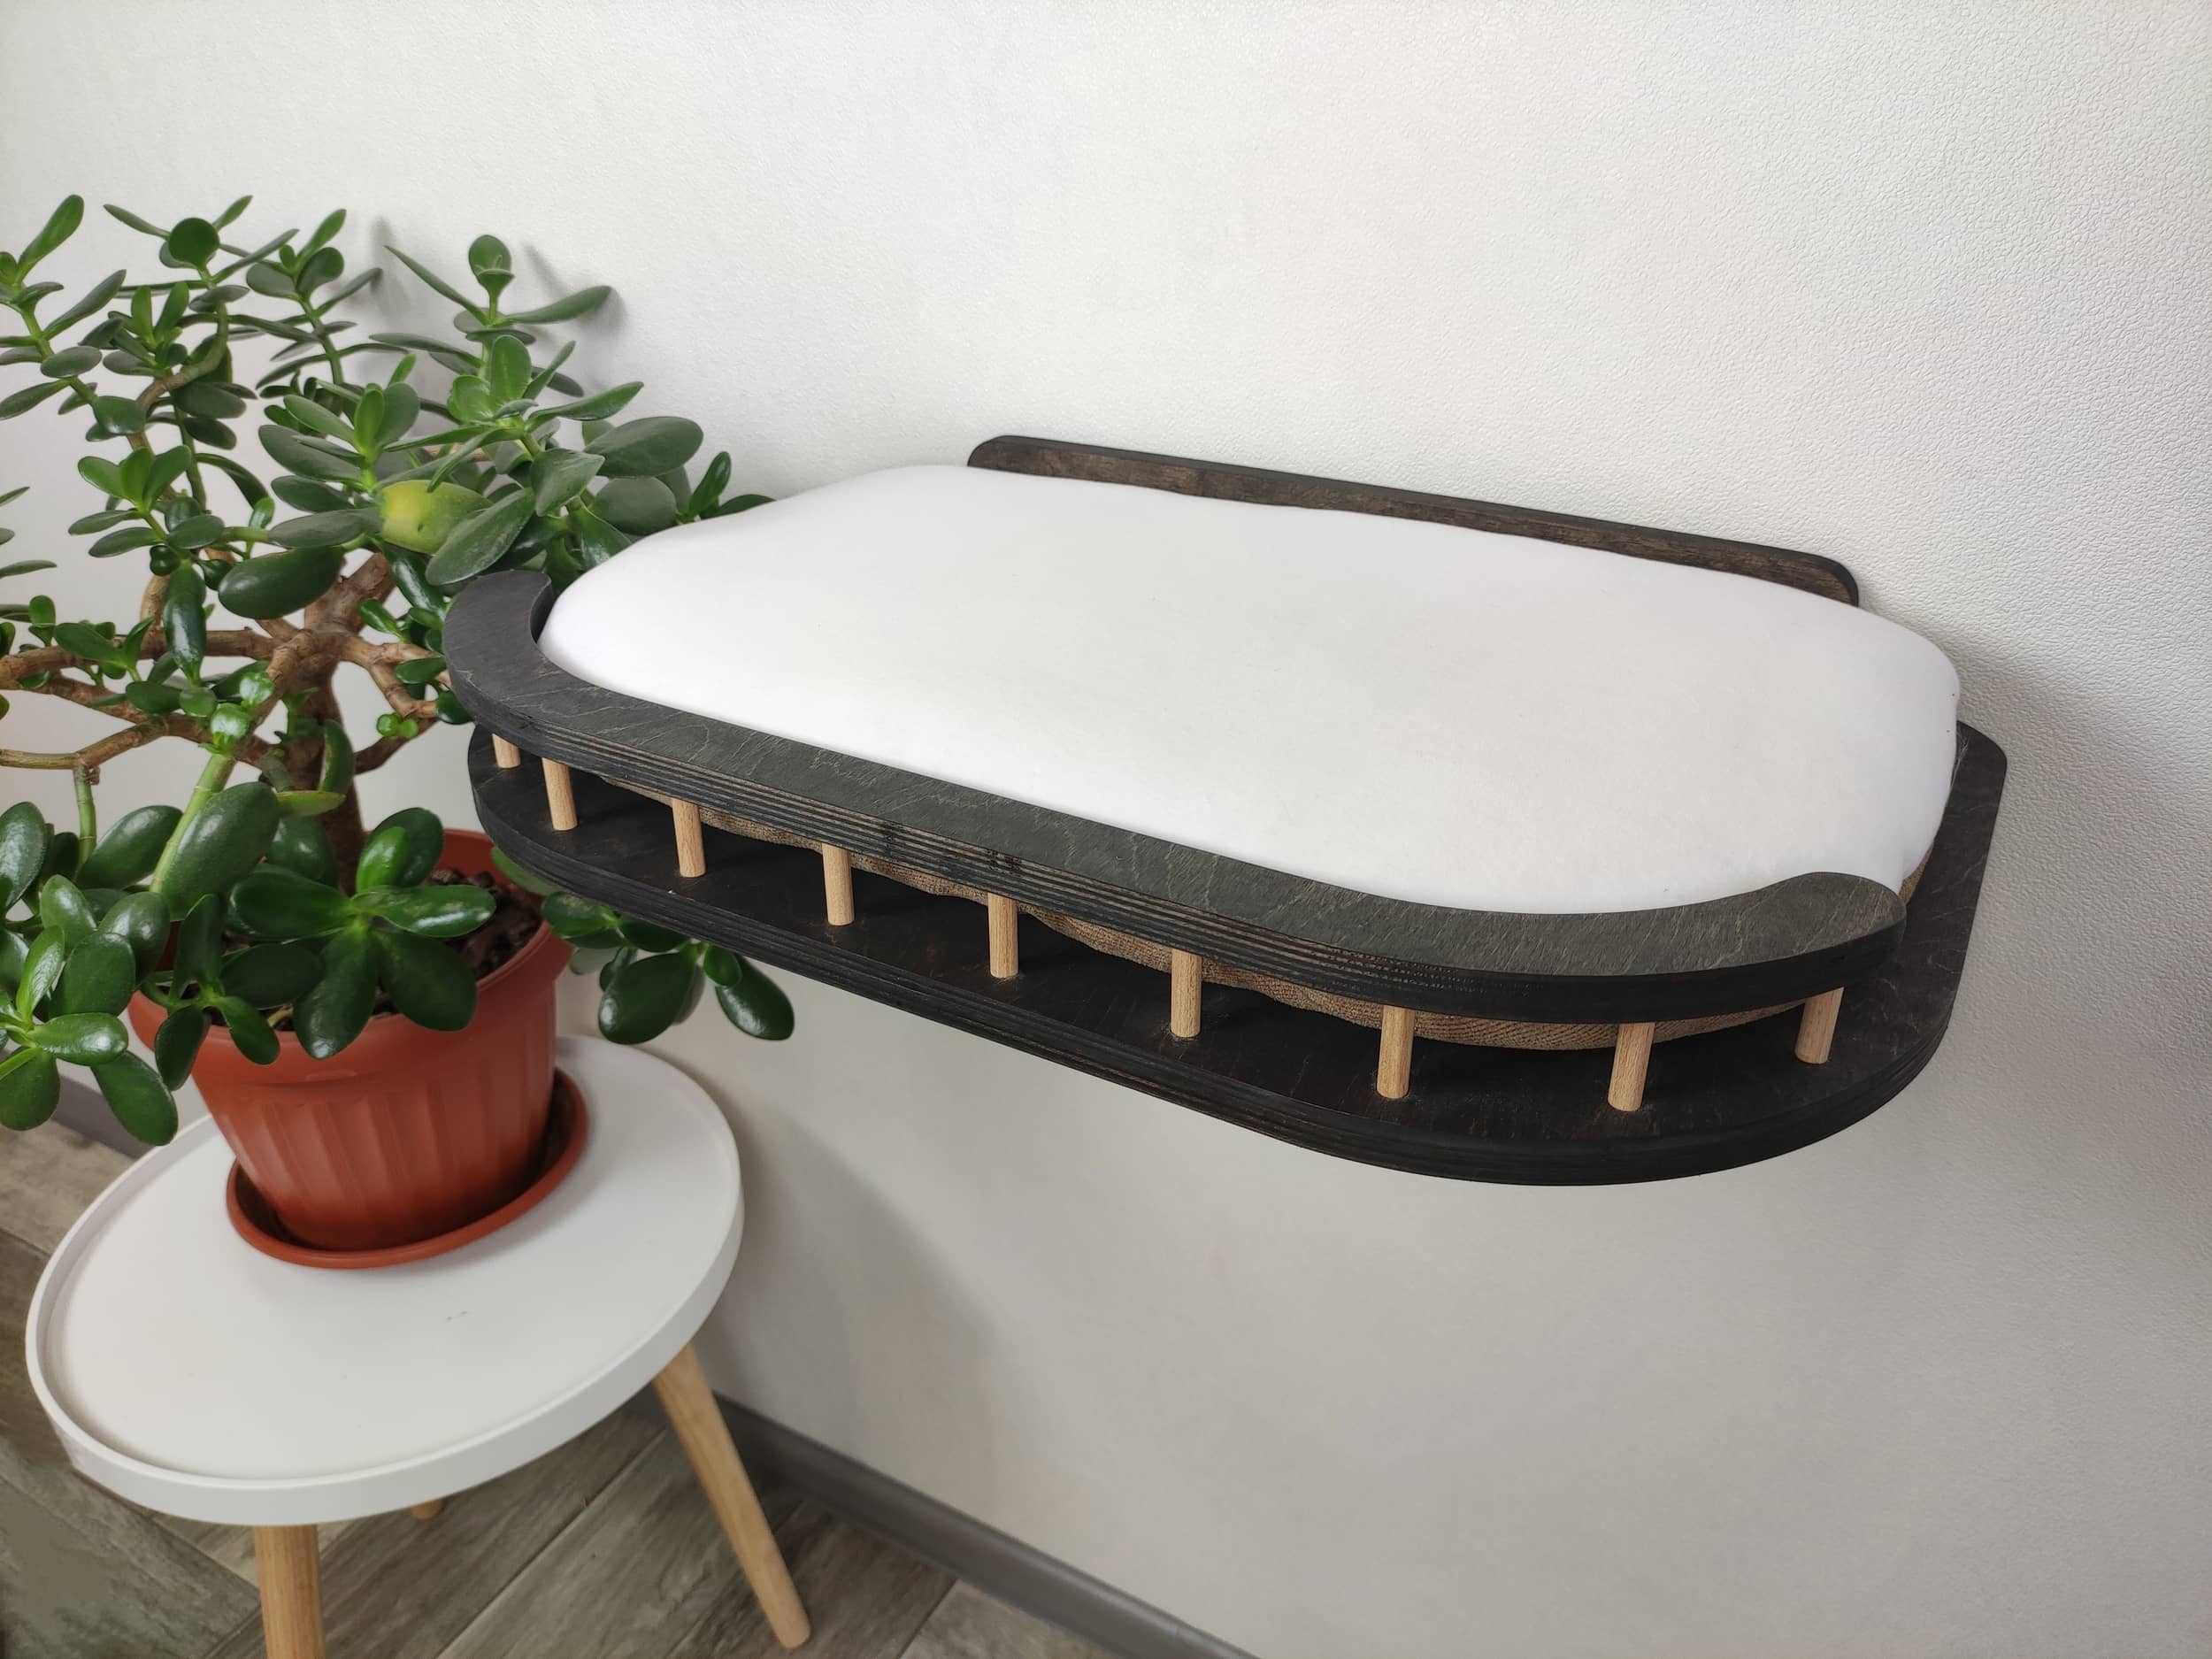 Cat wall bed in a dark colors of the wood and soft white pillow